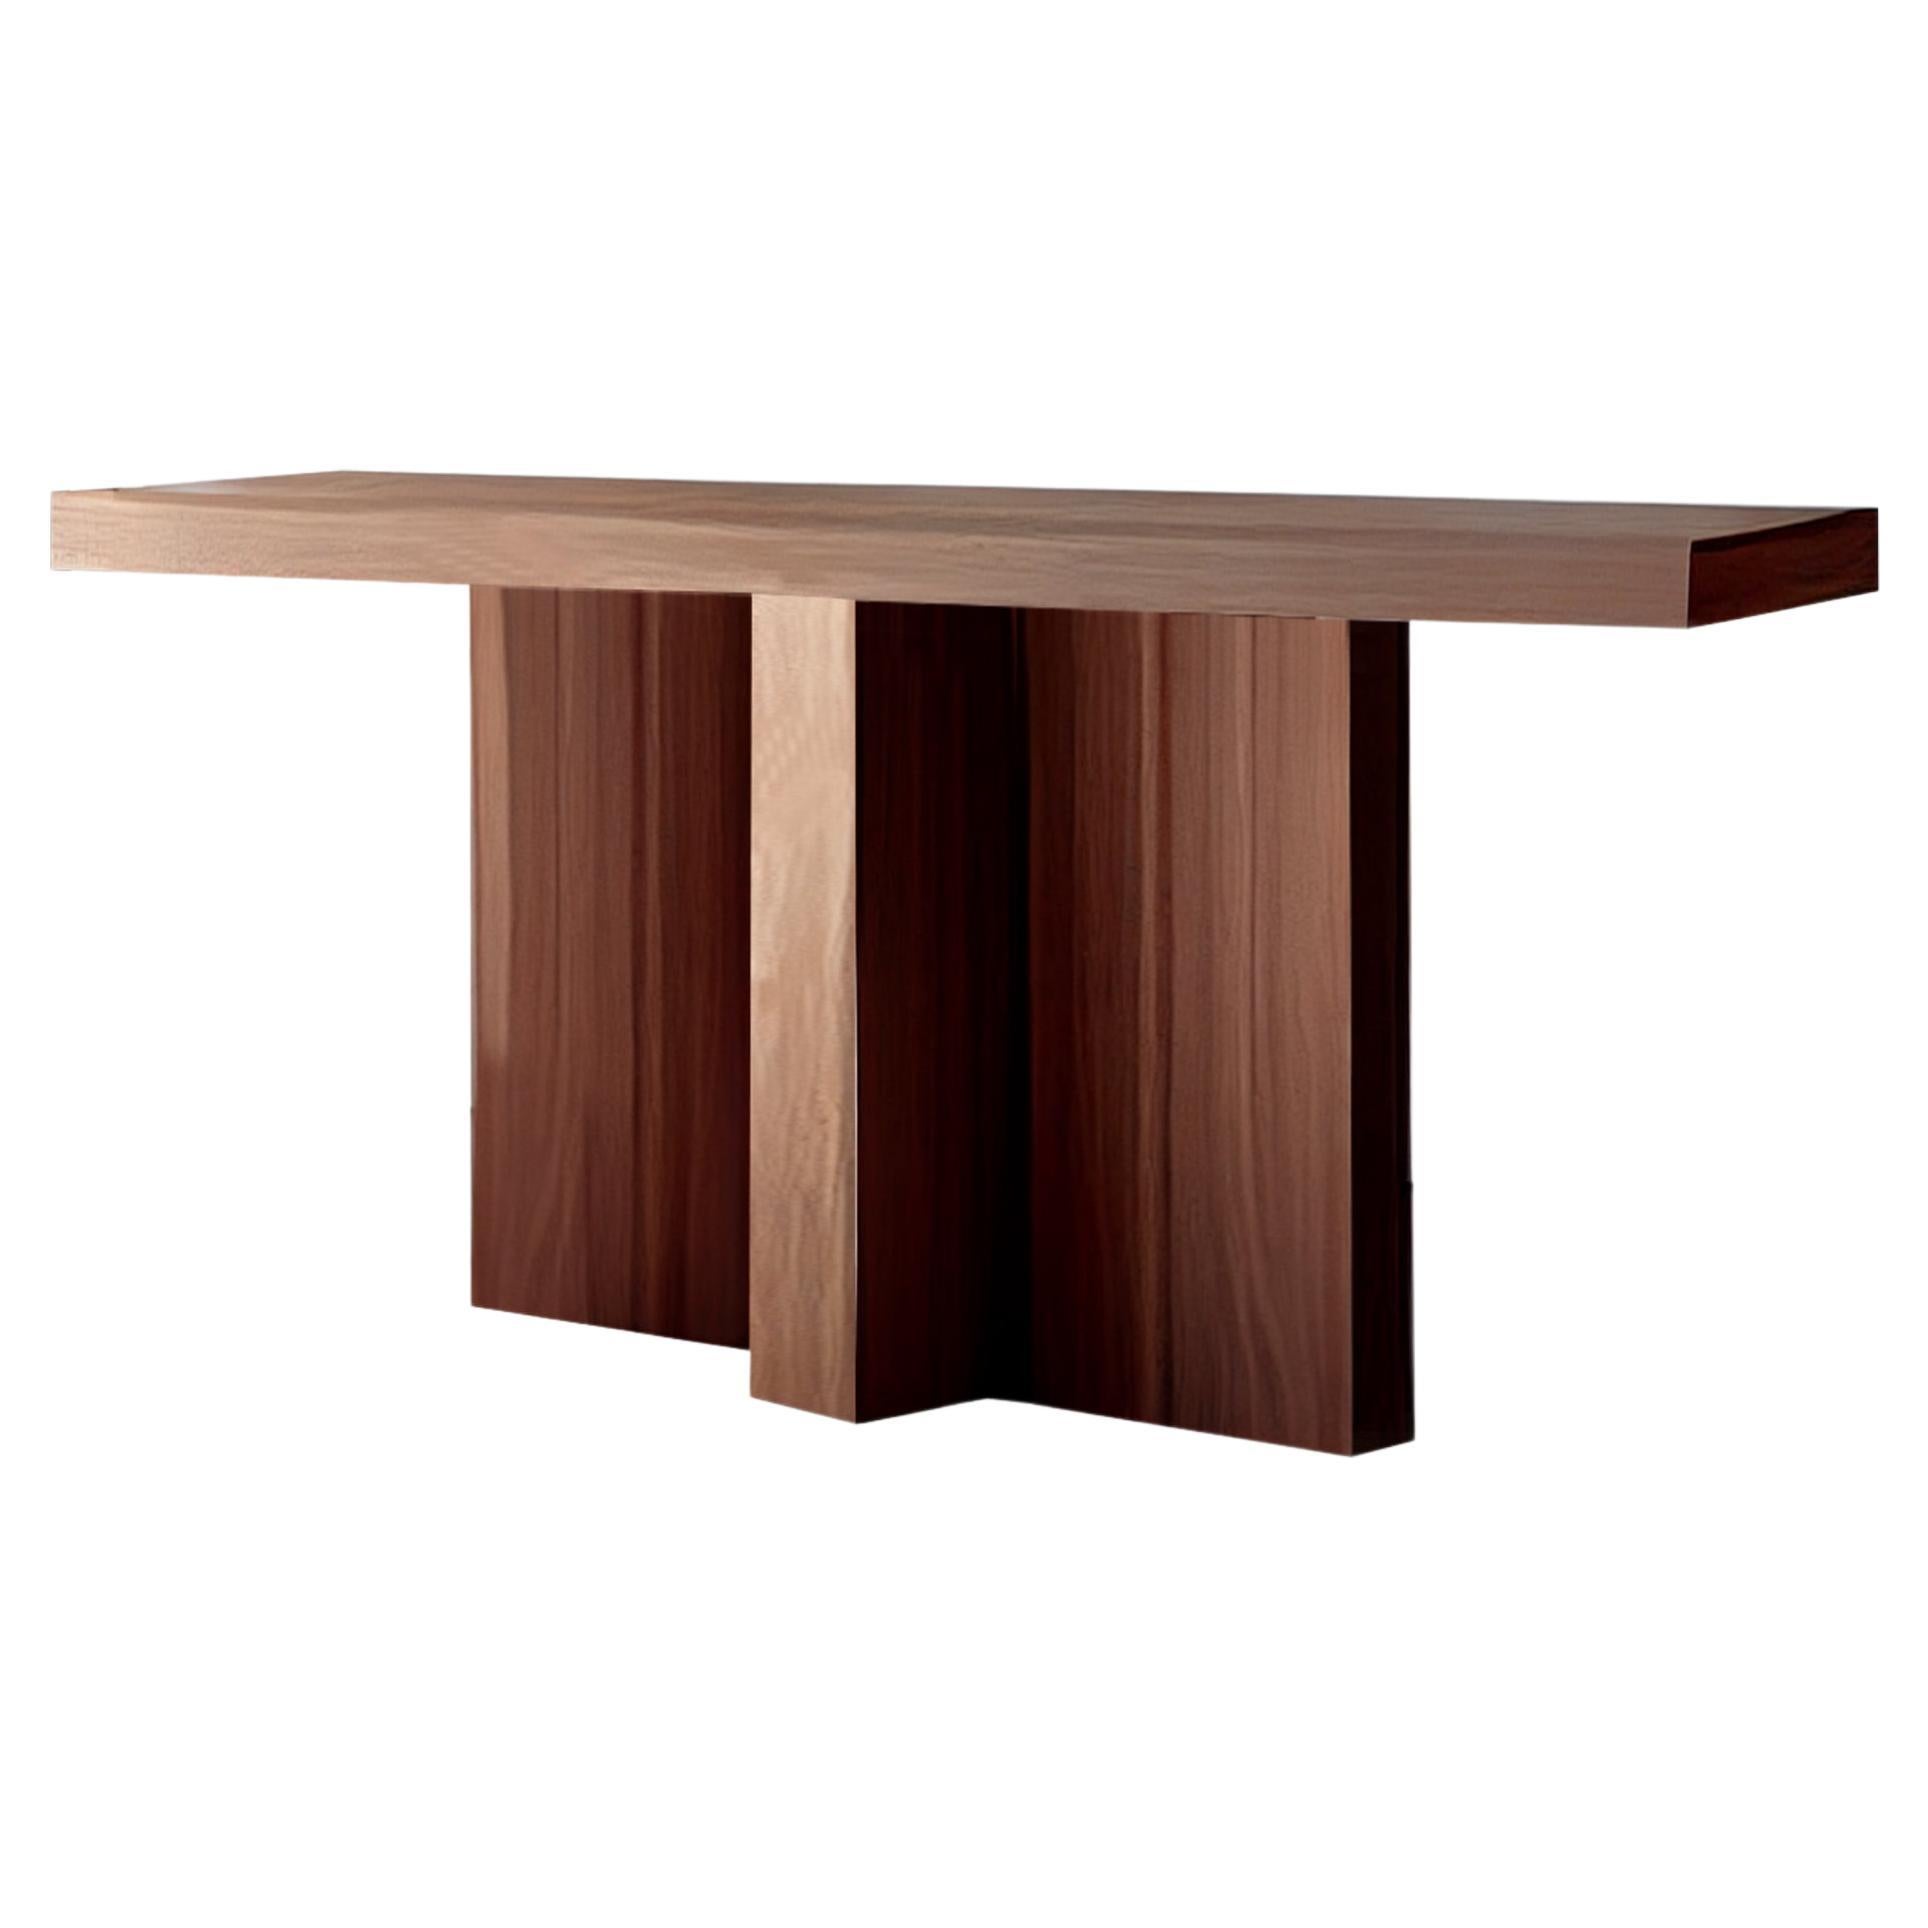 Basic Console Table, Sideboard Made of Solid Walnut Wood, Narrow Console by Nono For Sale